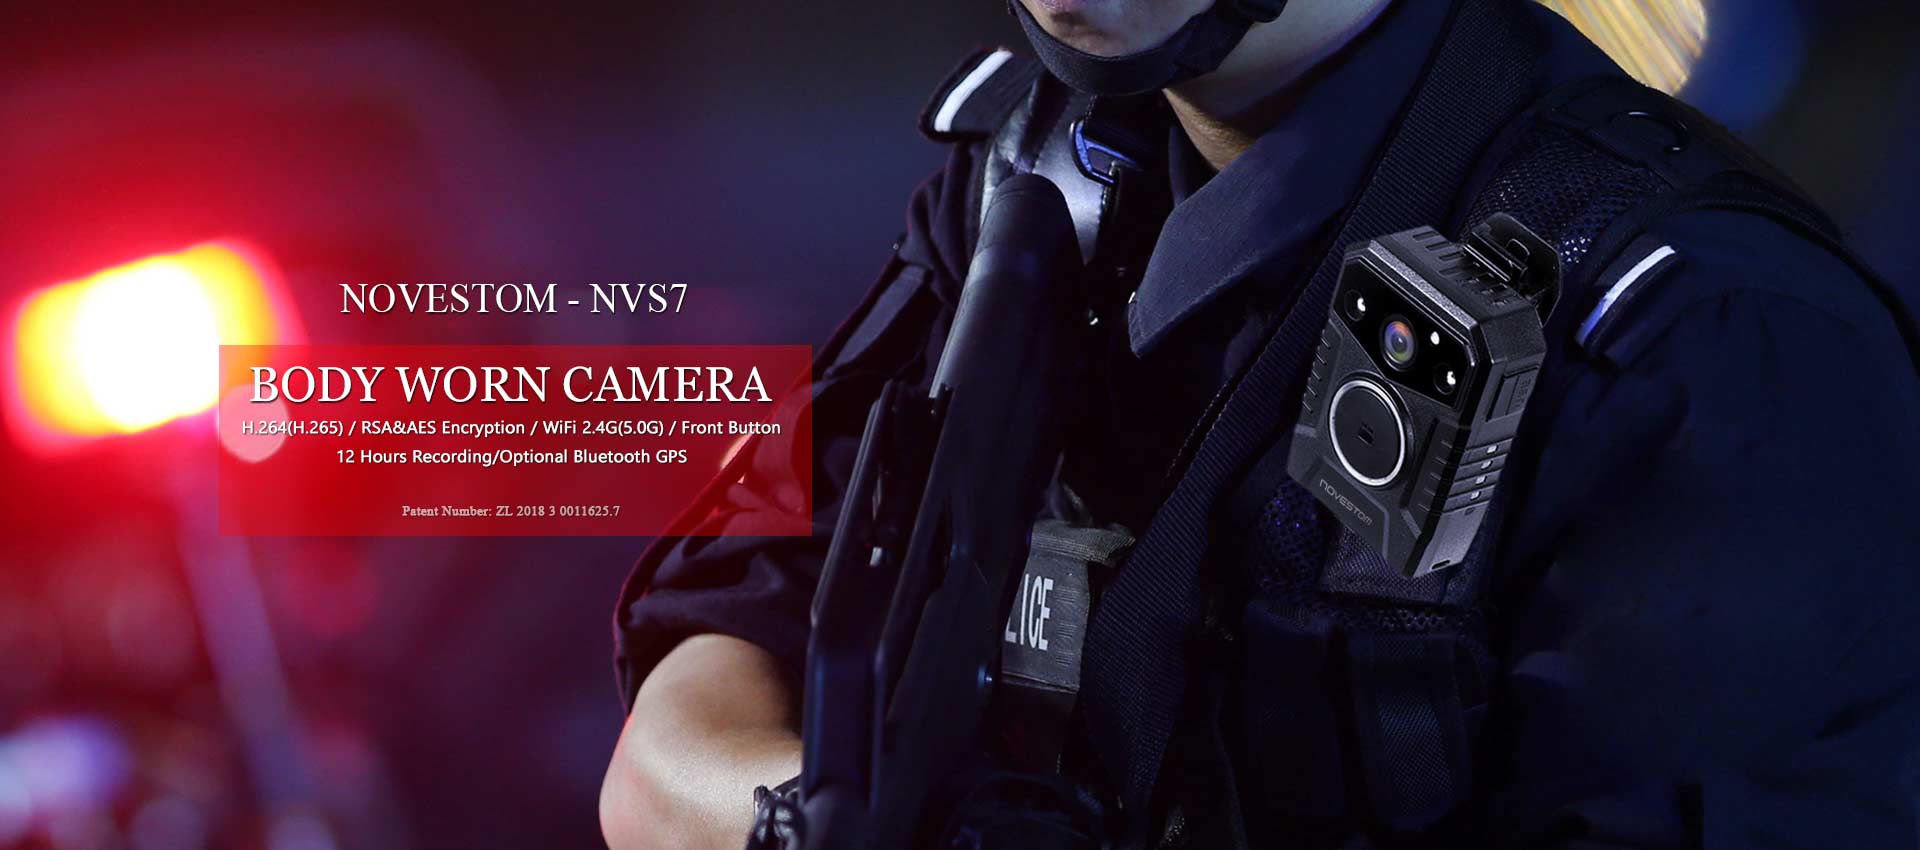 NVS7 wifi police style body worn video security cameras with GPS AES